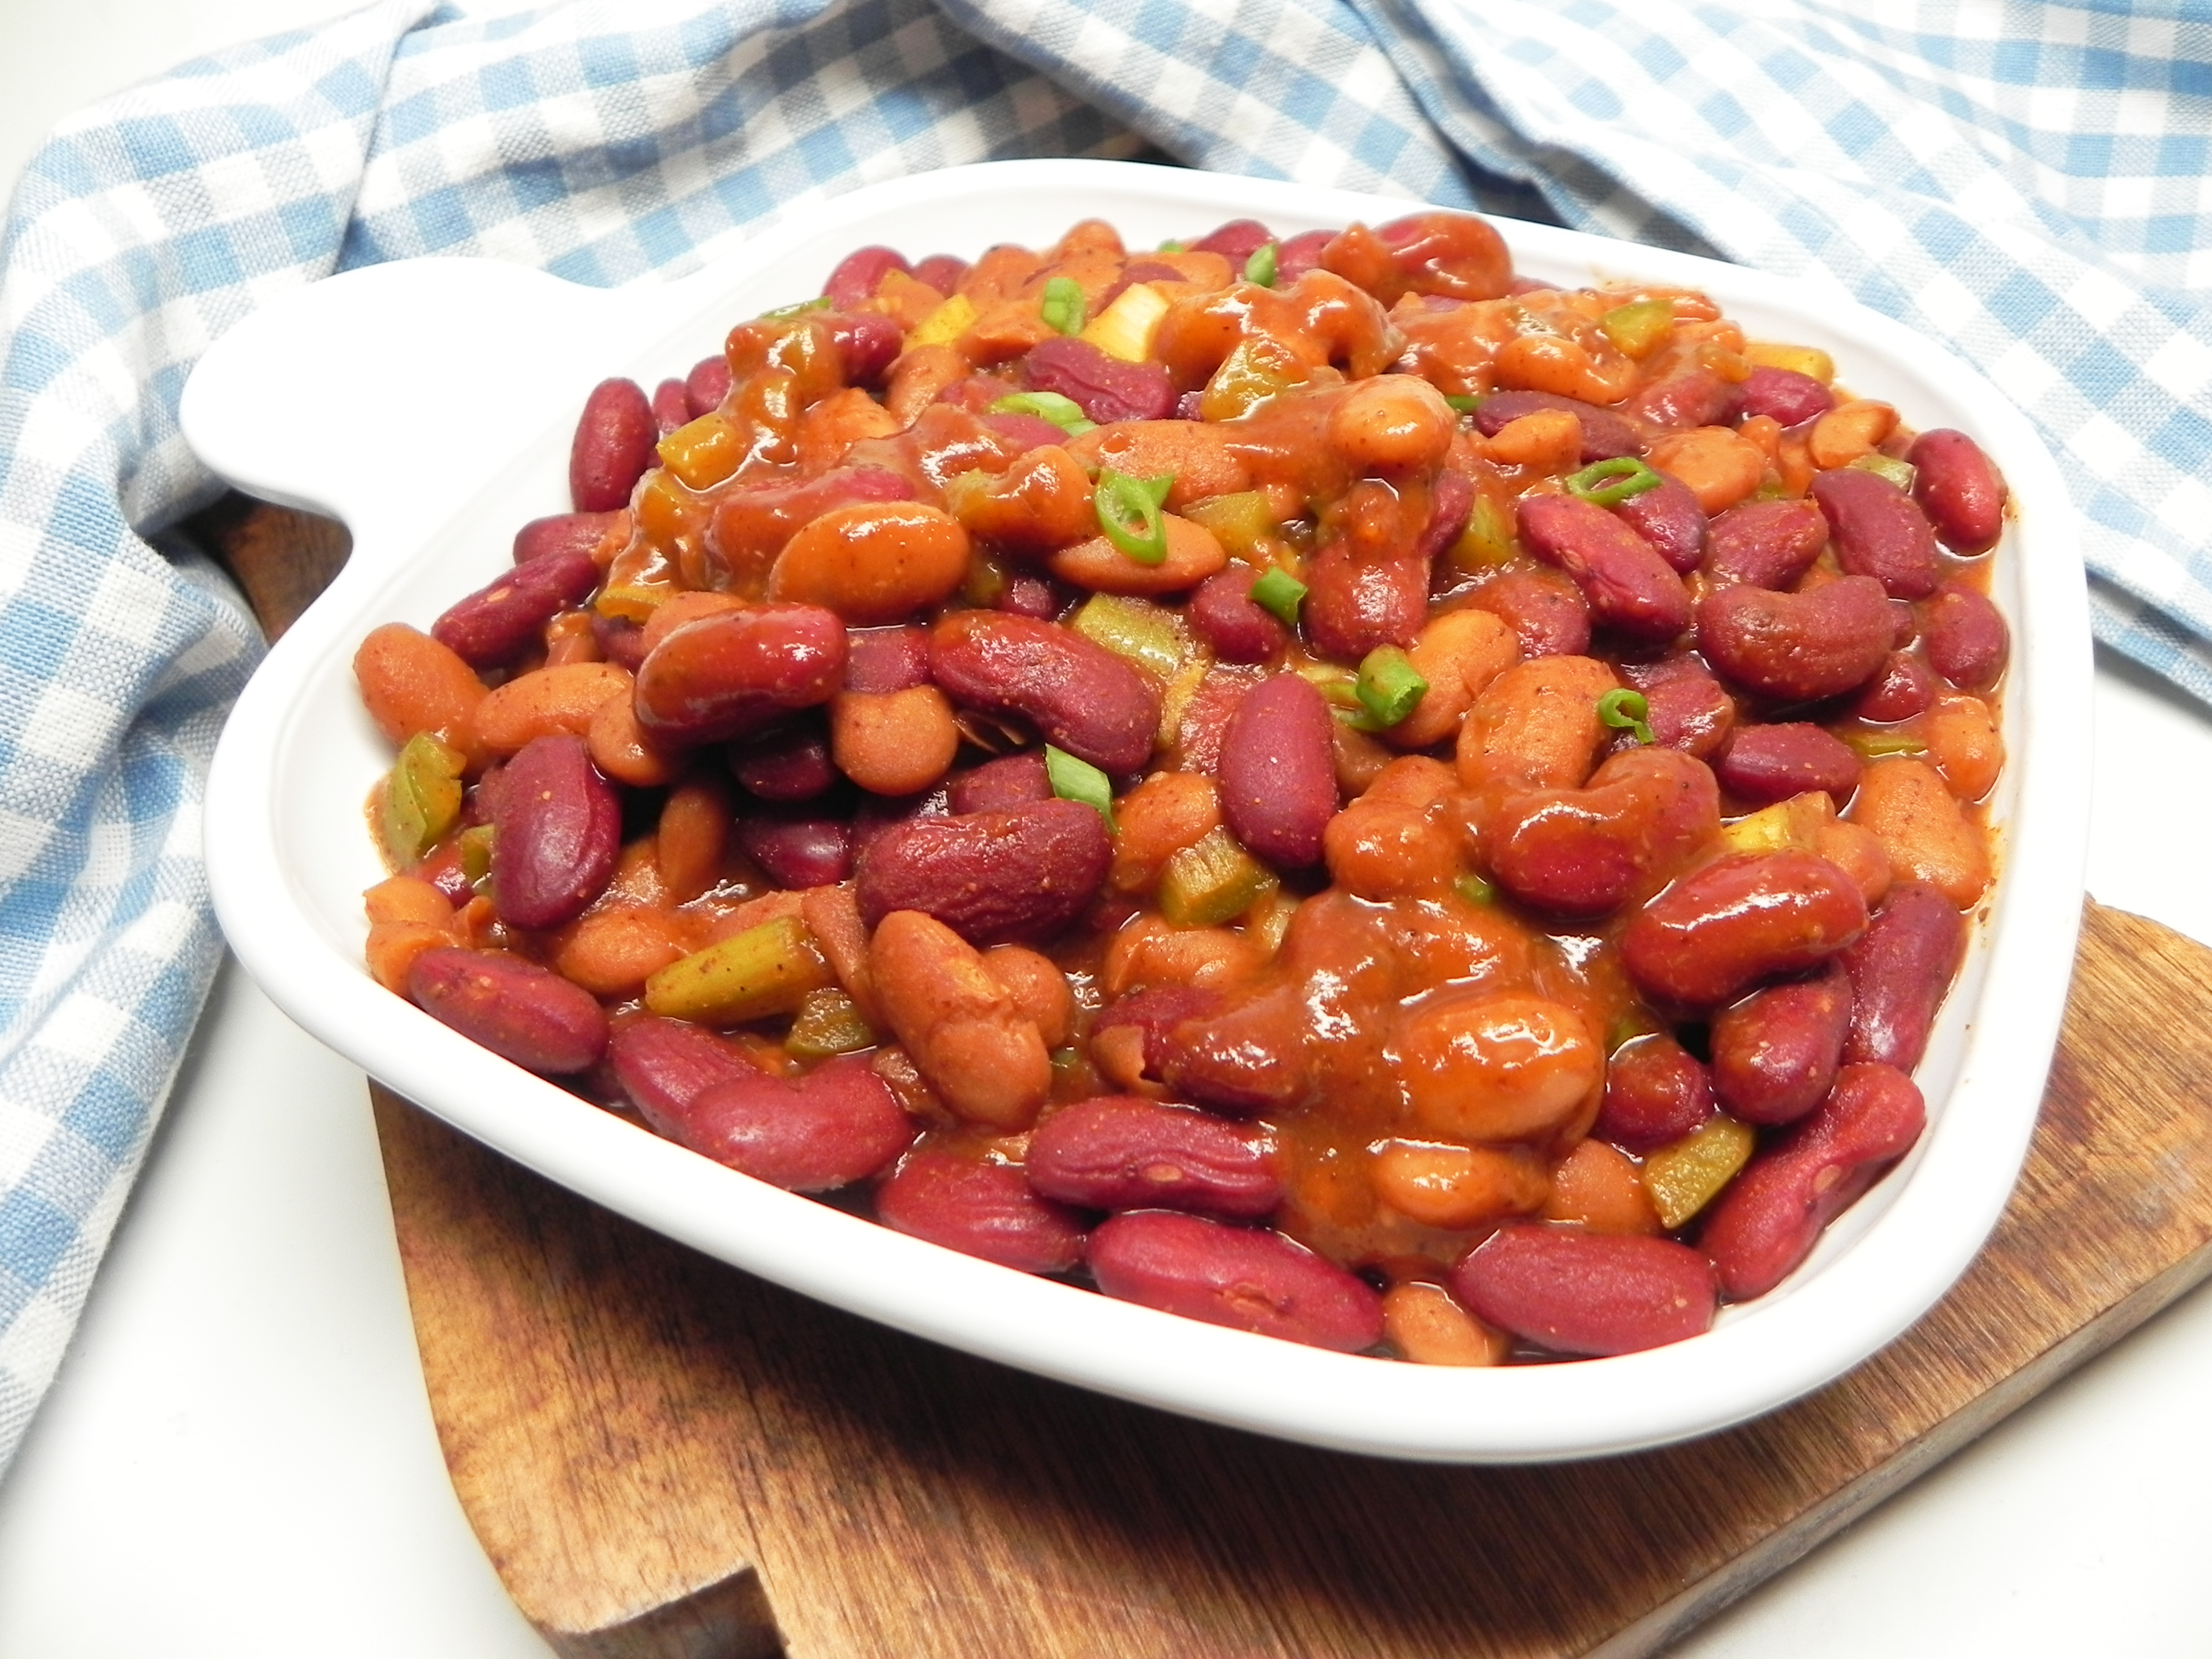 Home-Style Vegetarian Baked Beans 